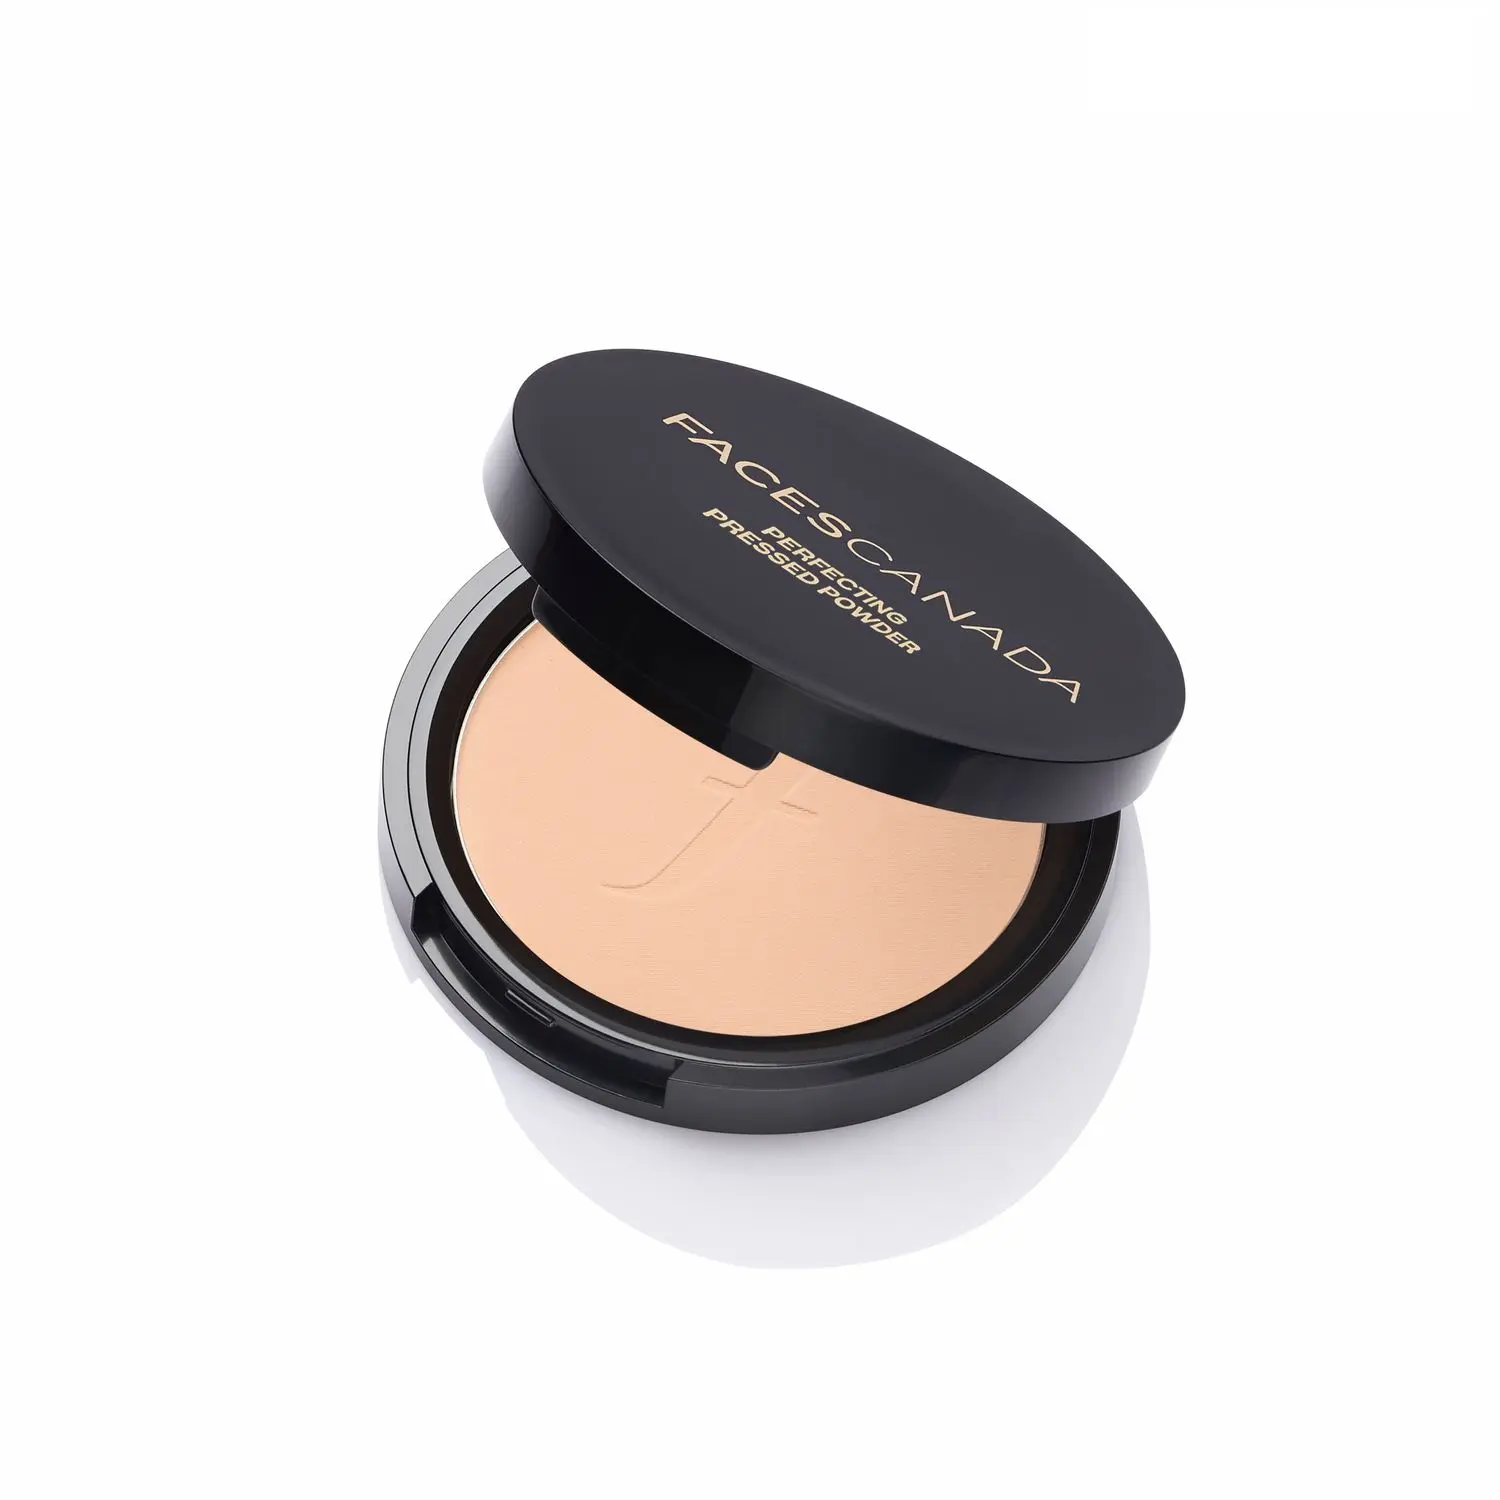 Faces Canada Perfecting Pressed Powder - Sand 04 (9 g)